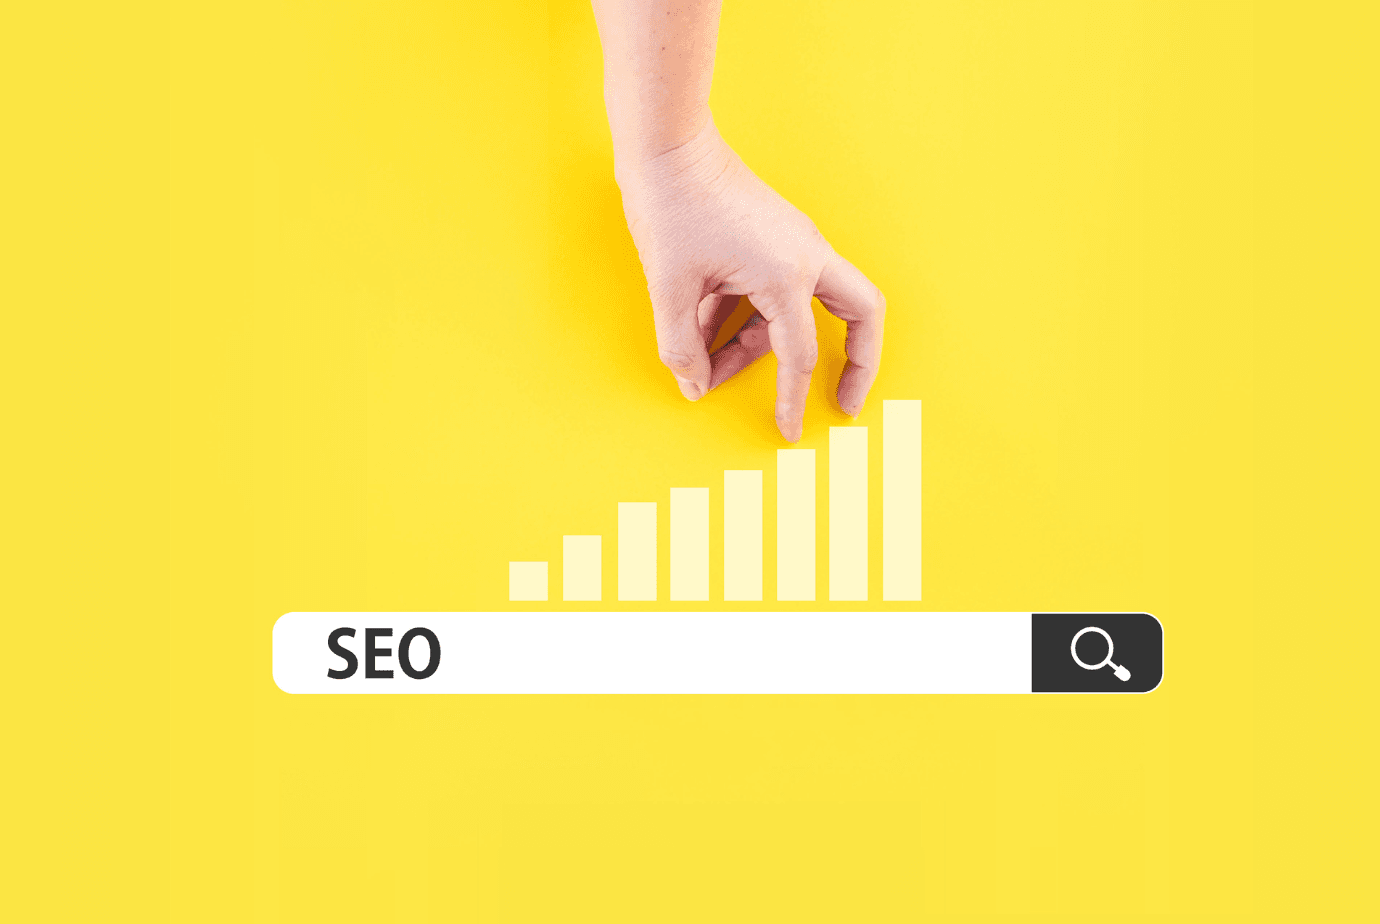 How to Improve Your SEO Performance with These 20 Proven Tips